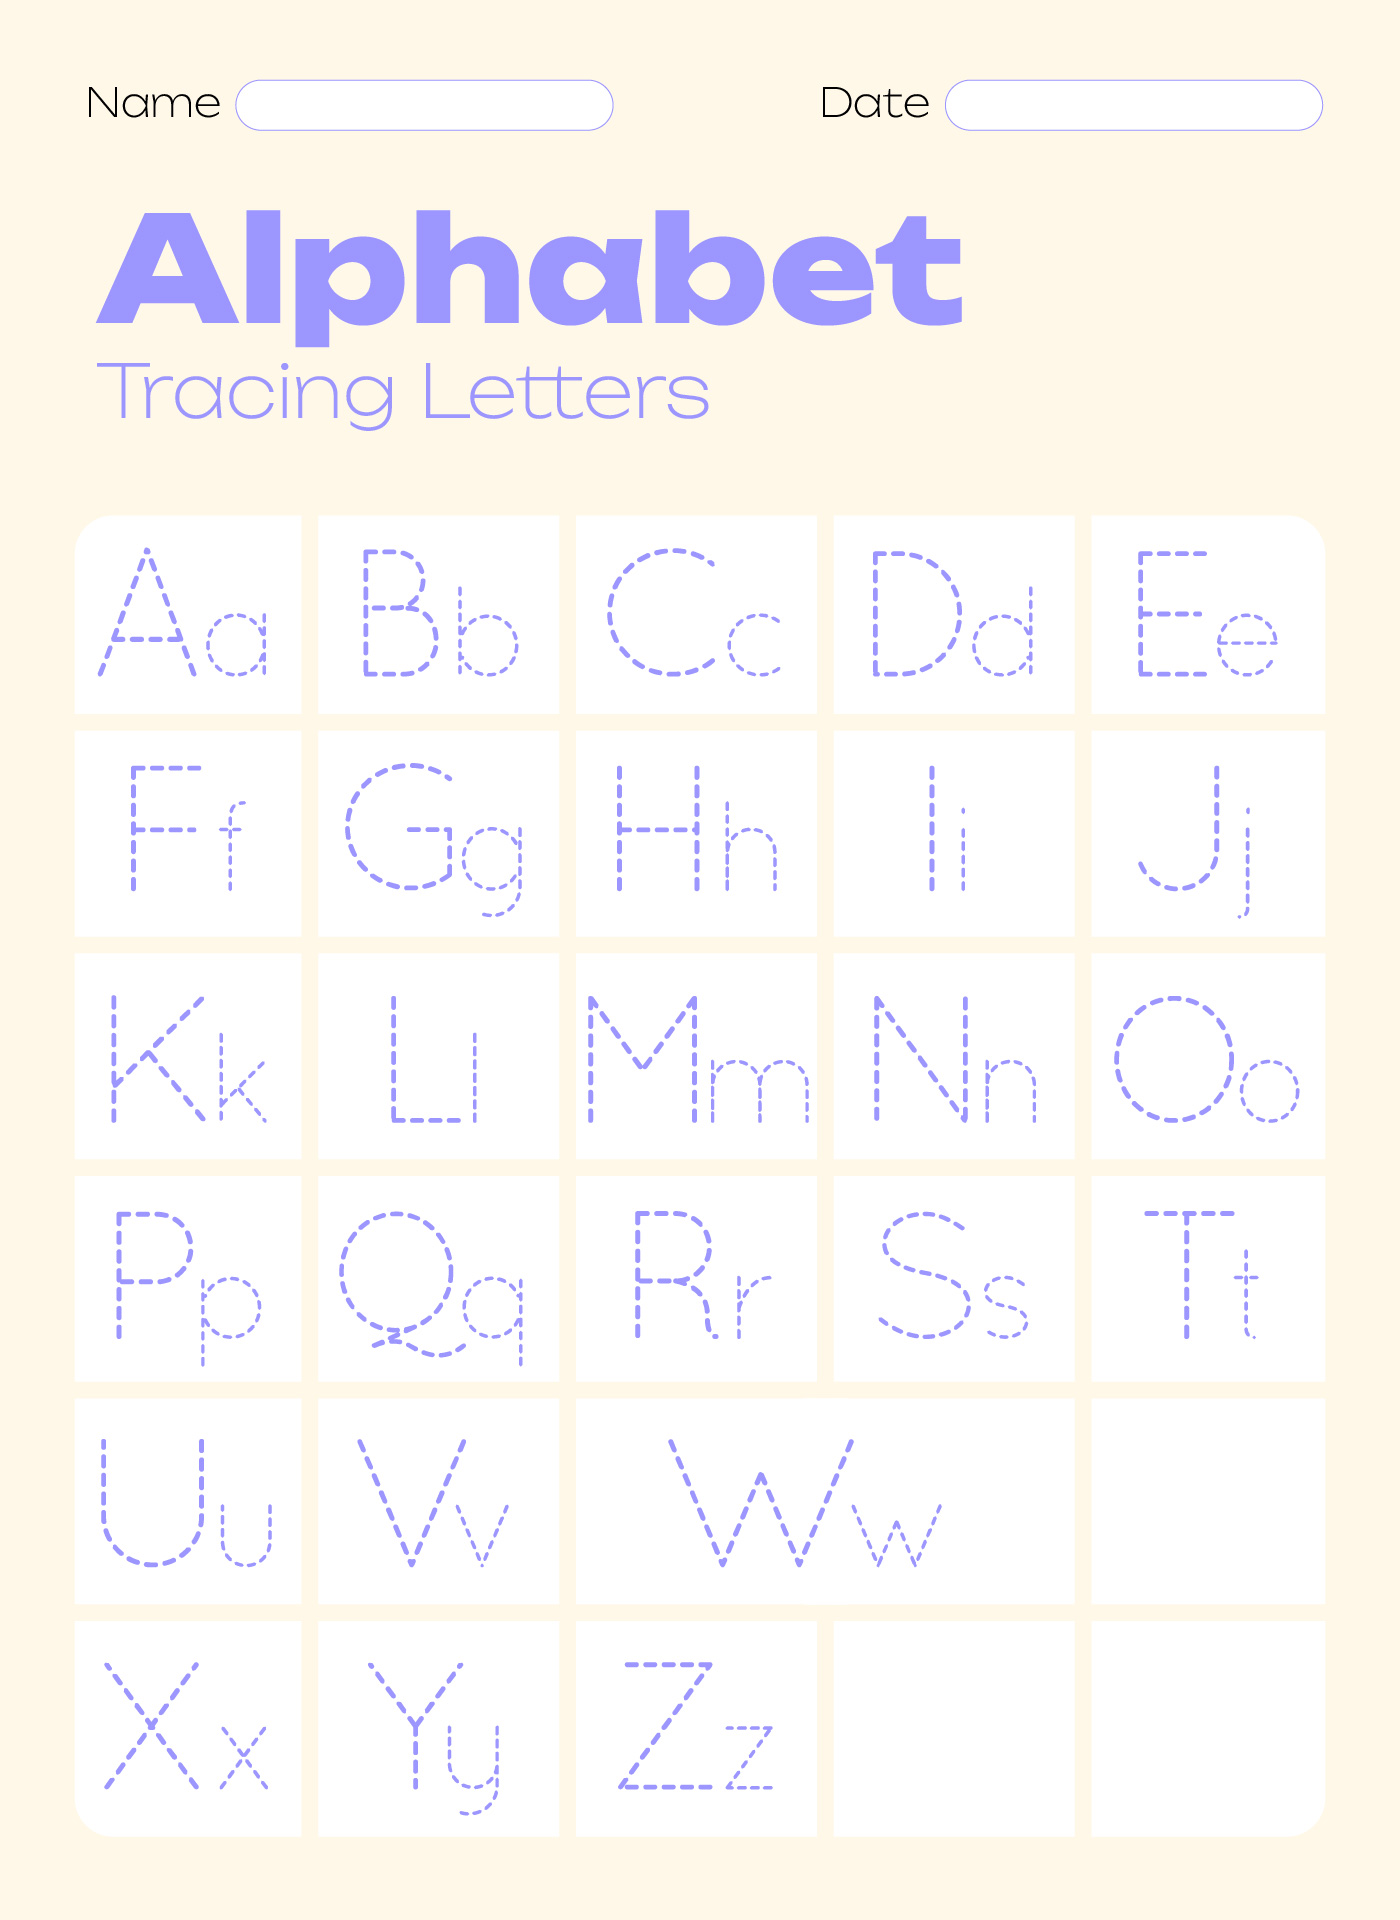 alphabet-tracing-worksheets-a-z-free-printable-for-kids-123-kids-fun-apps-10-best-free